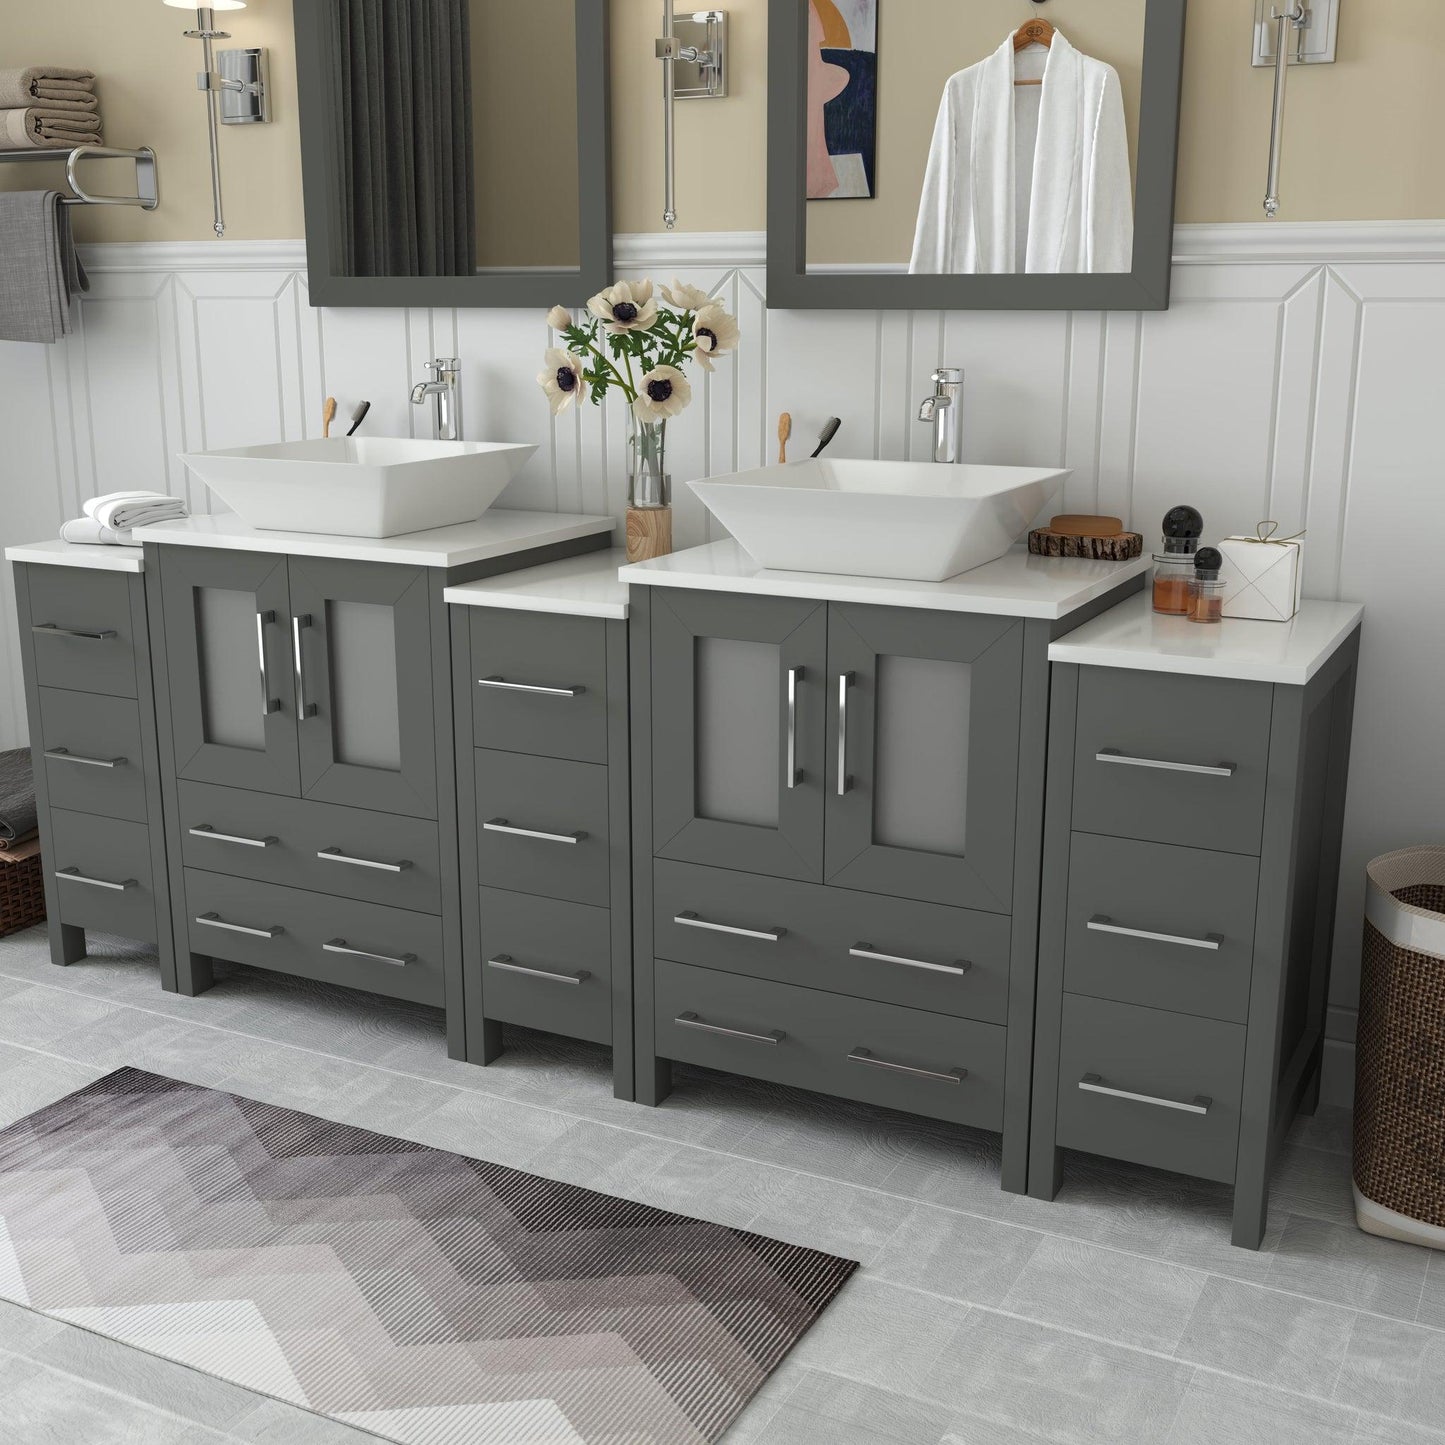 Vanity Art Ravenna 84" Double Gray Freestanding Vanity Set With White Engineered Marble Top, 2 Ceramic Vessel Sinks, 3 Side Cabinets and 2 Mirrors